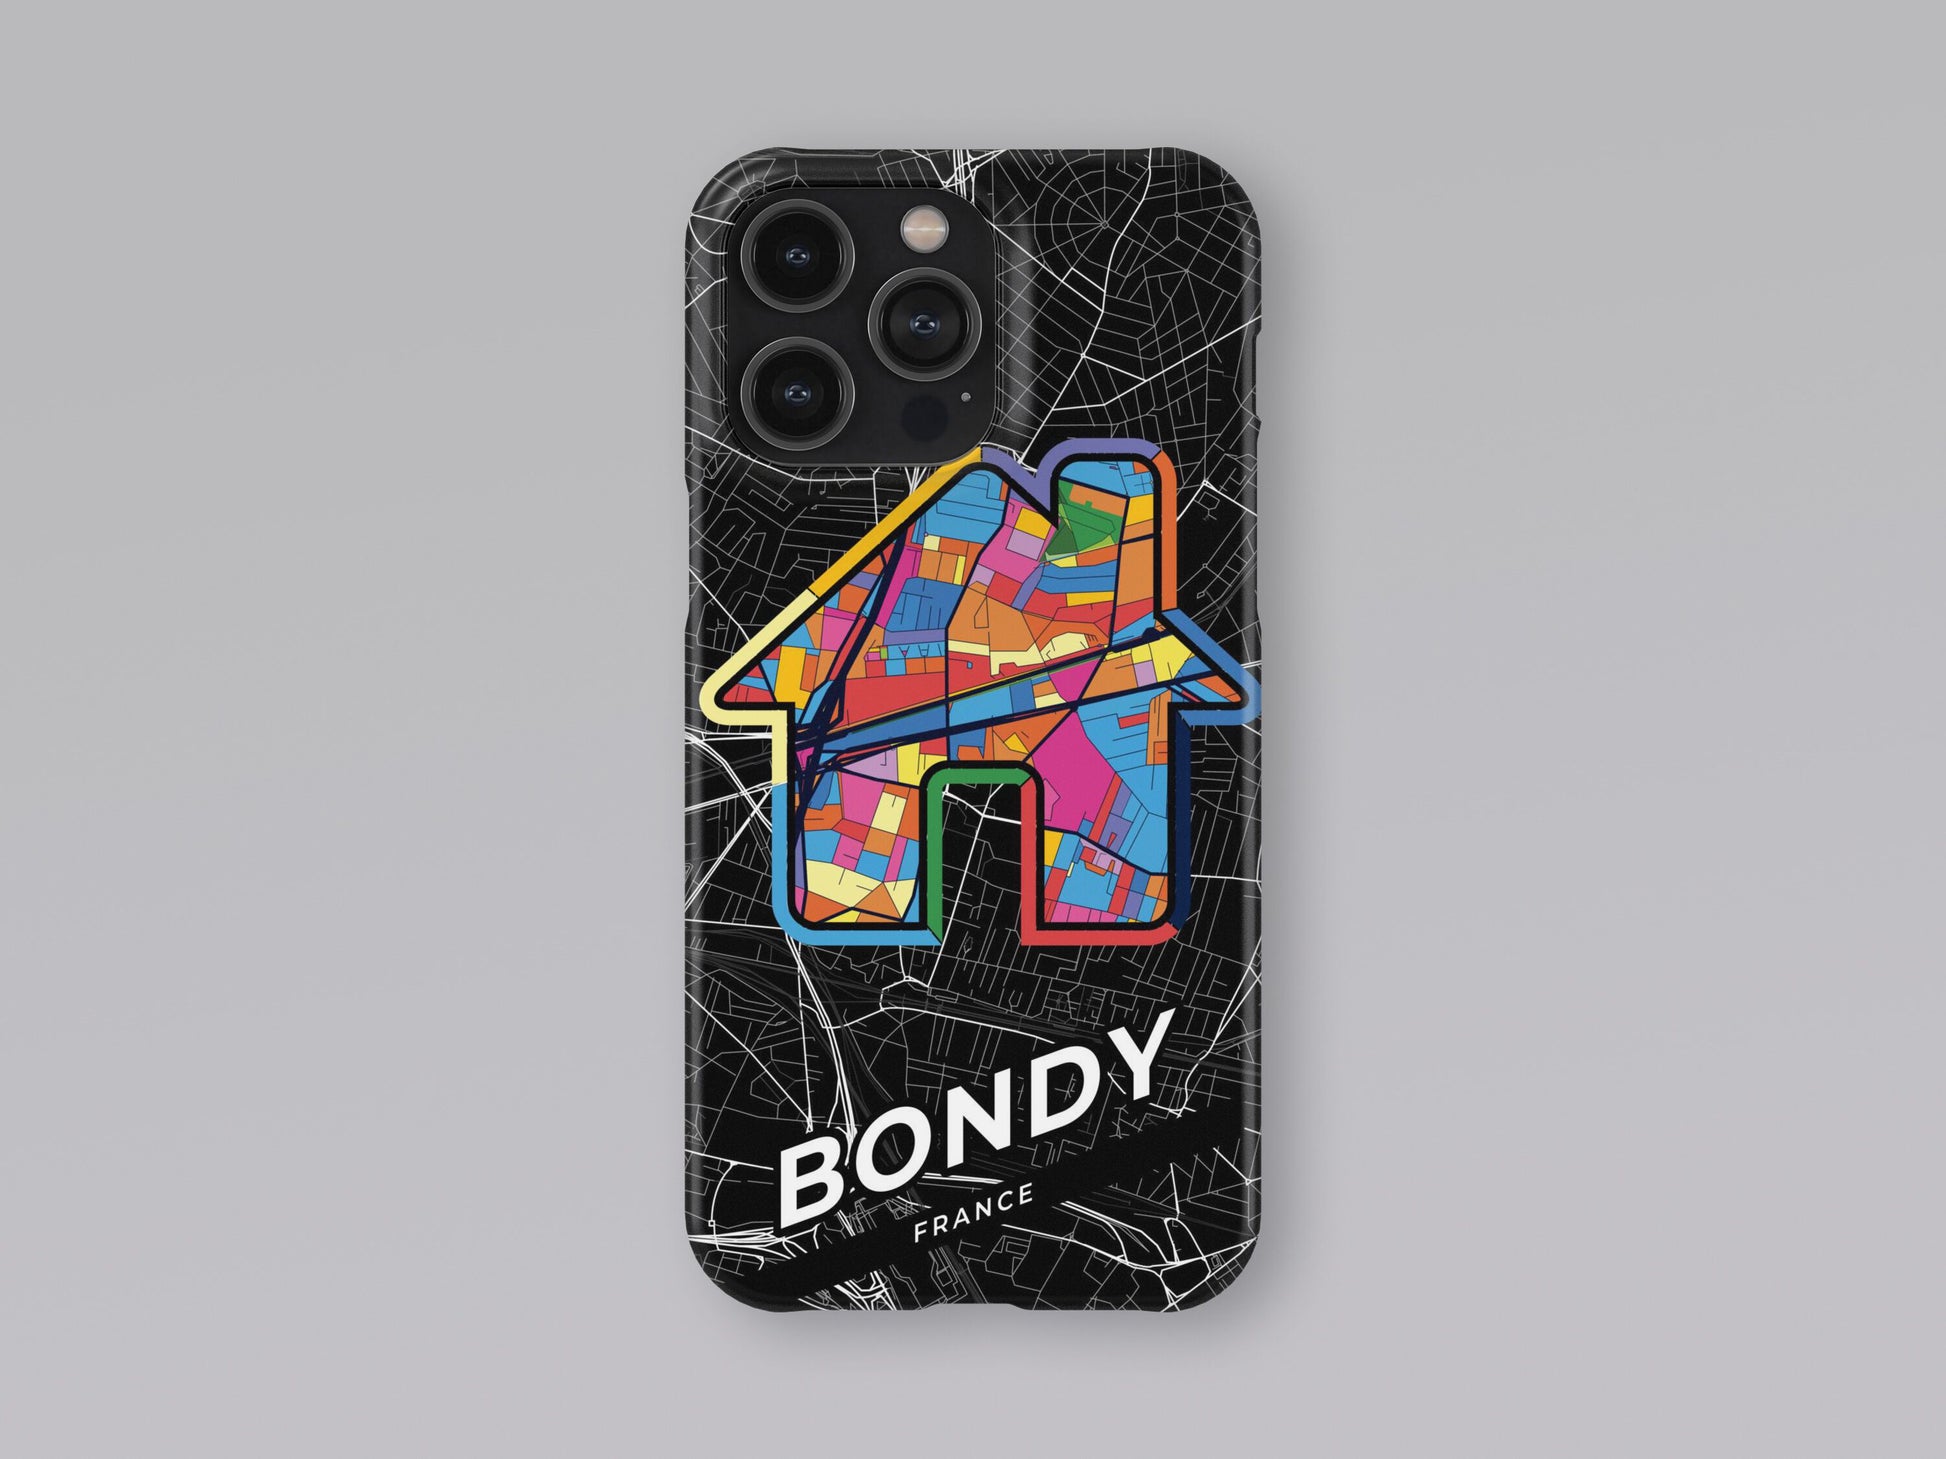 Bondy France slim phone case with colorful icon. Birthday, wedding or housewarming gift. Couple match cases. 3